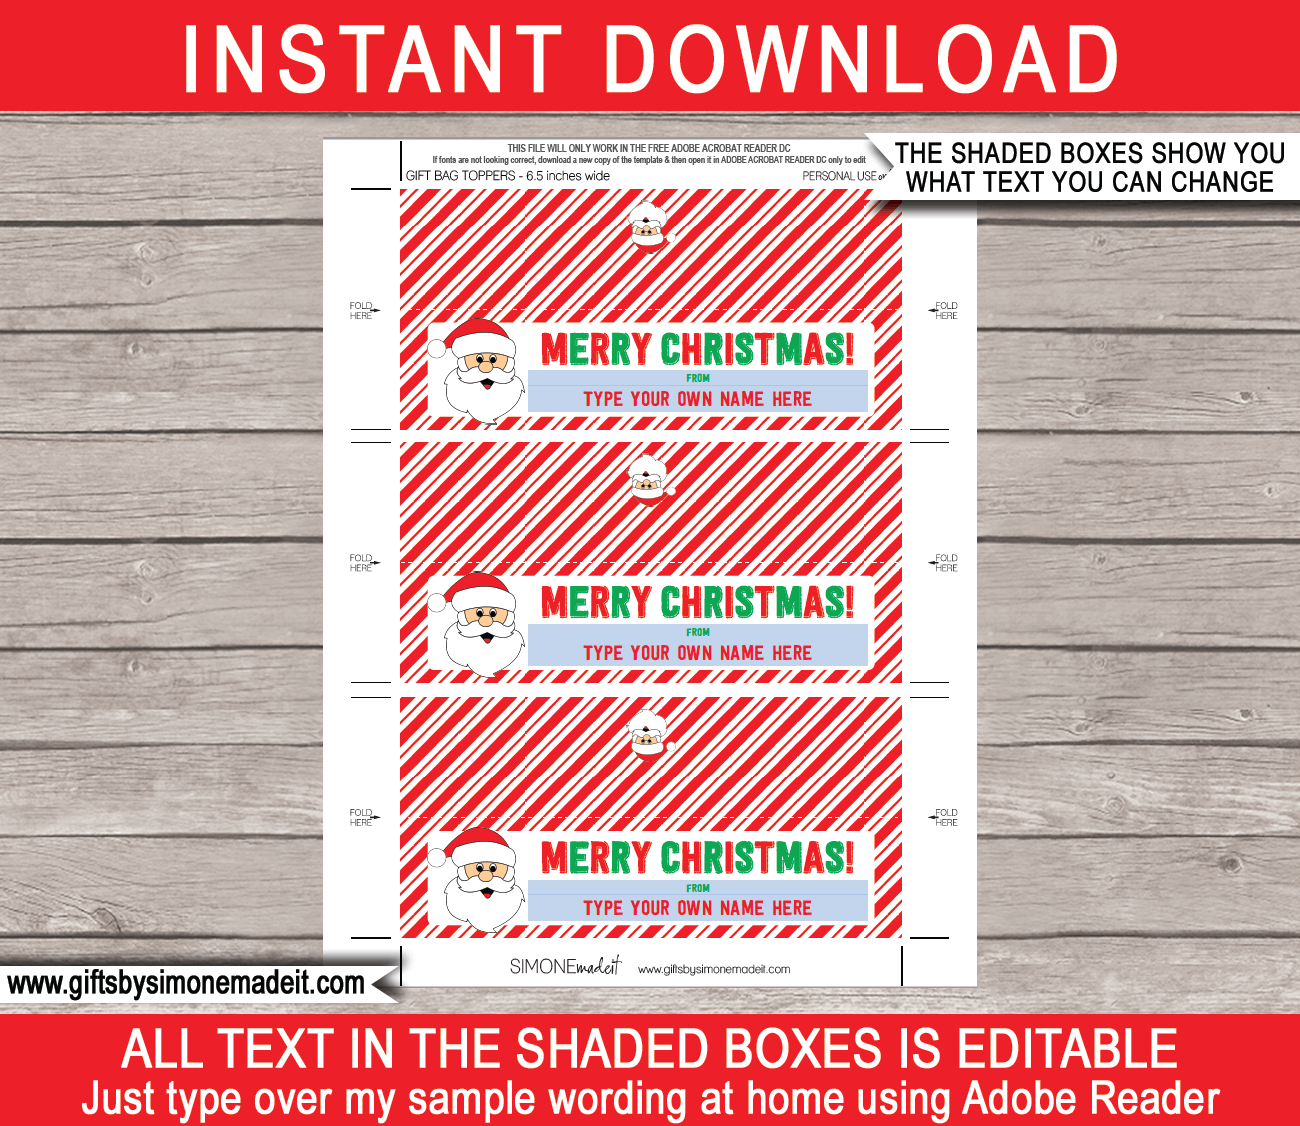 https://www.giftsbysimonemadeit.com/wp-content/uploads/2020/11/Christmas-Gift-Bag-Toppers-6.5-inch-Printable-Template-Editable-Text-santa.png